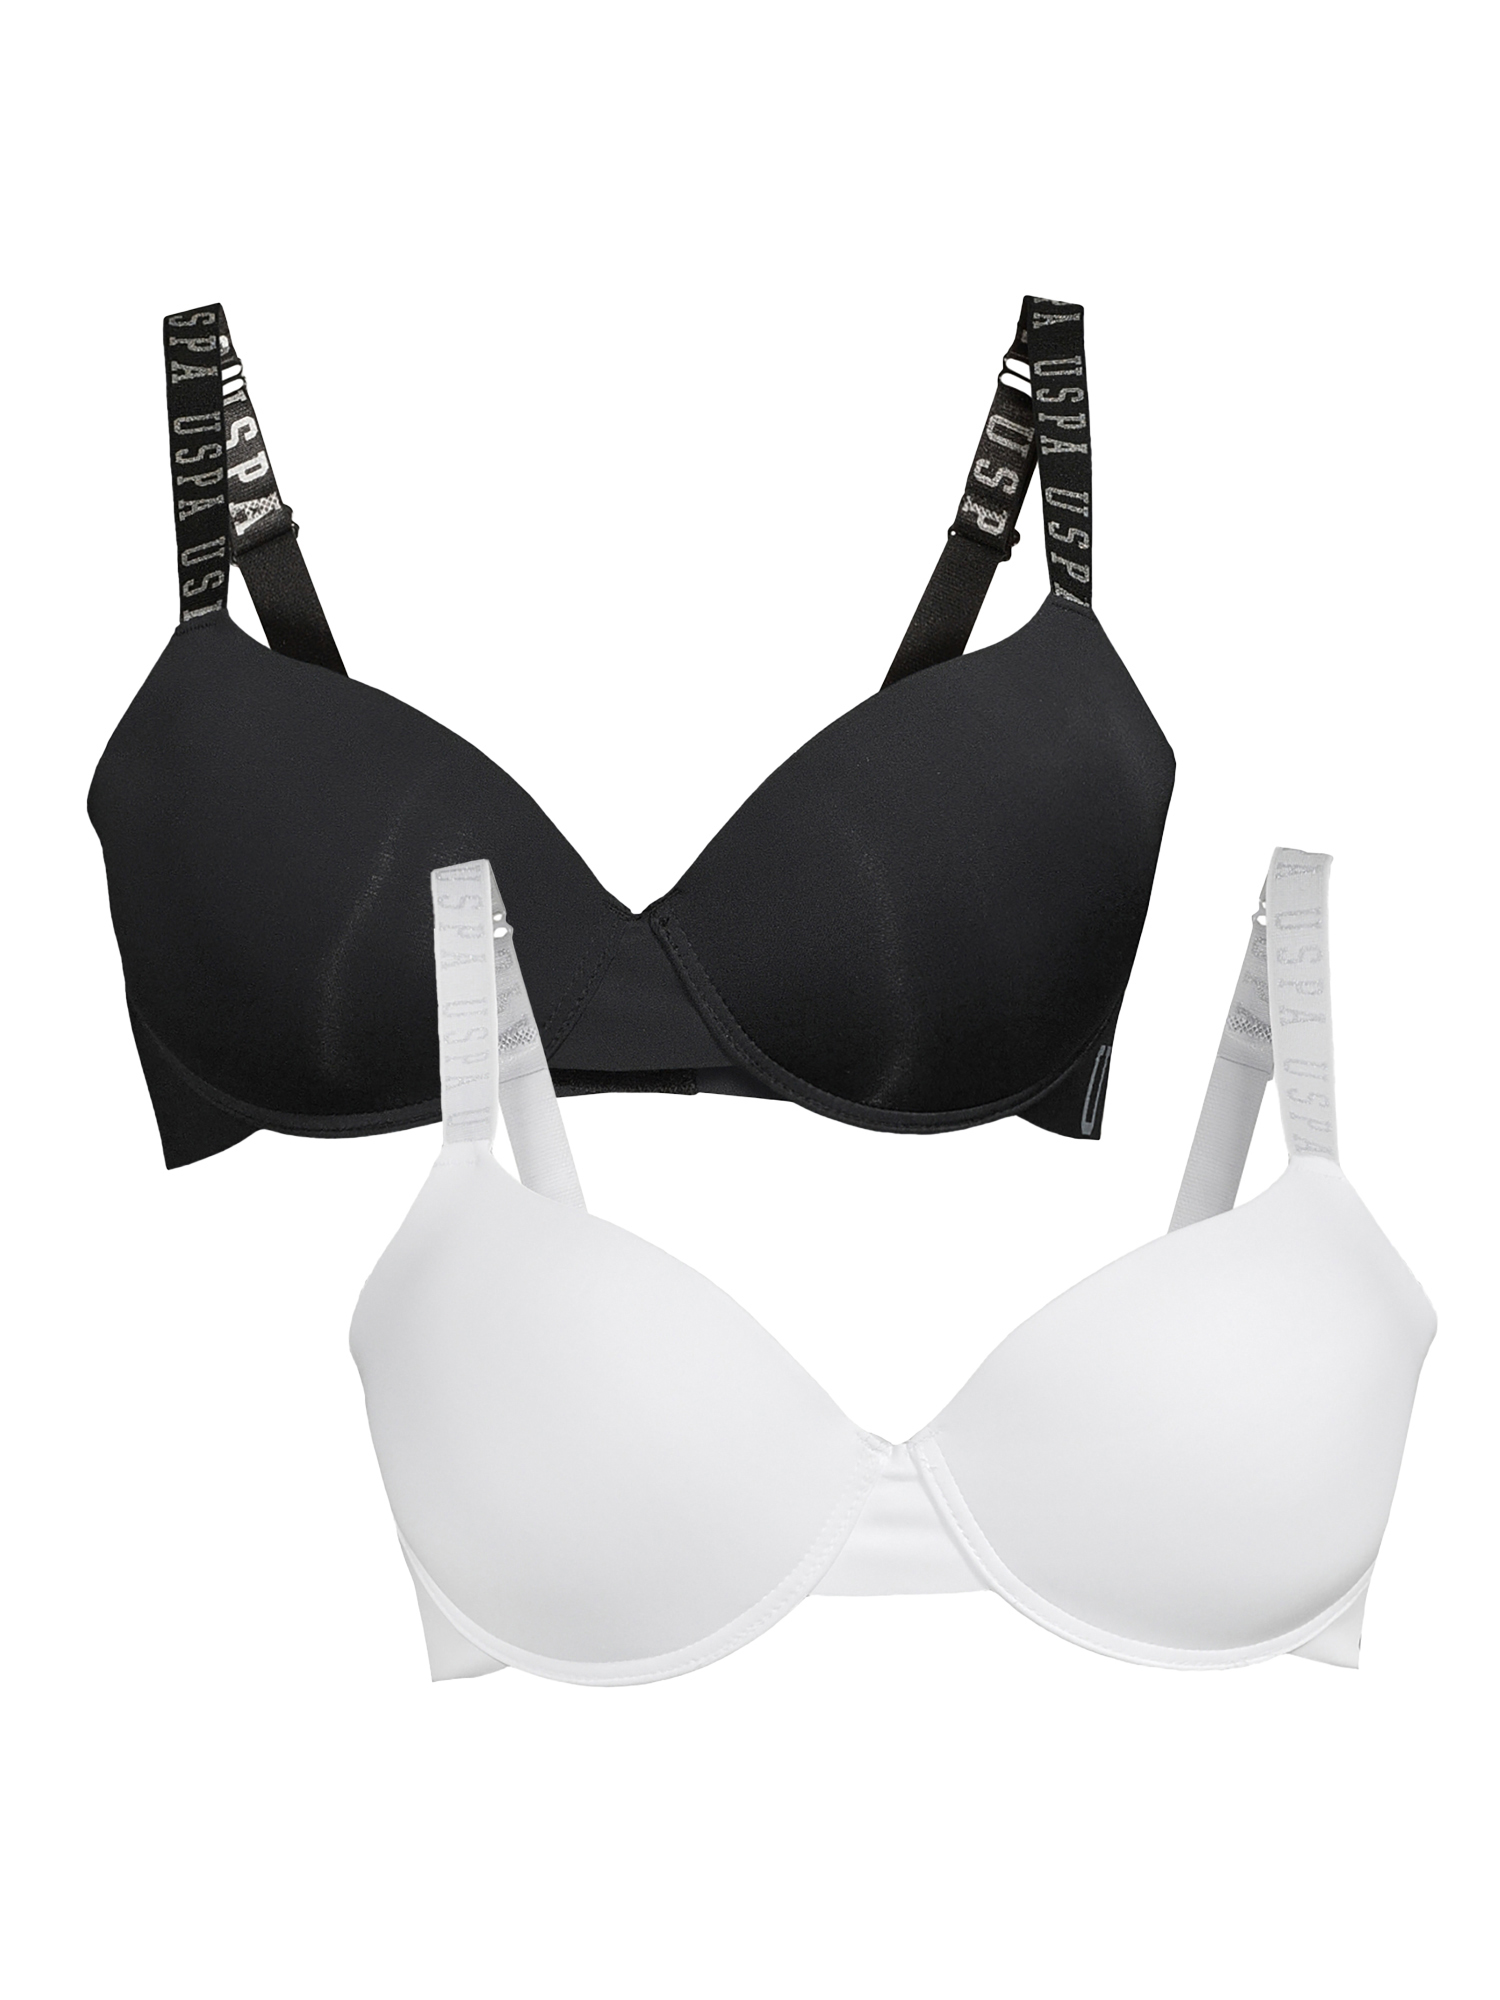 U.S. Polo Assn. Women's Plus Size Tag-Free Microfiber Bra with Gentle Lift, 2-Pack - image 1 of 4